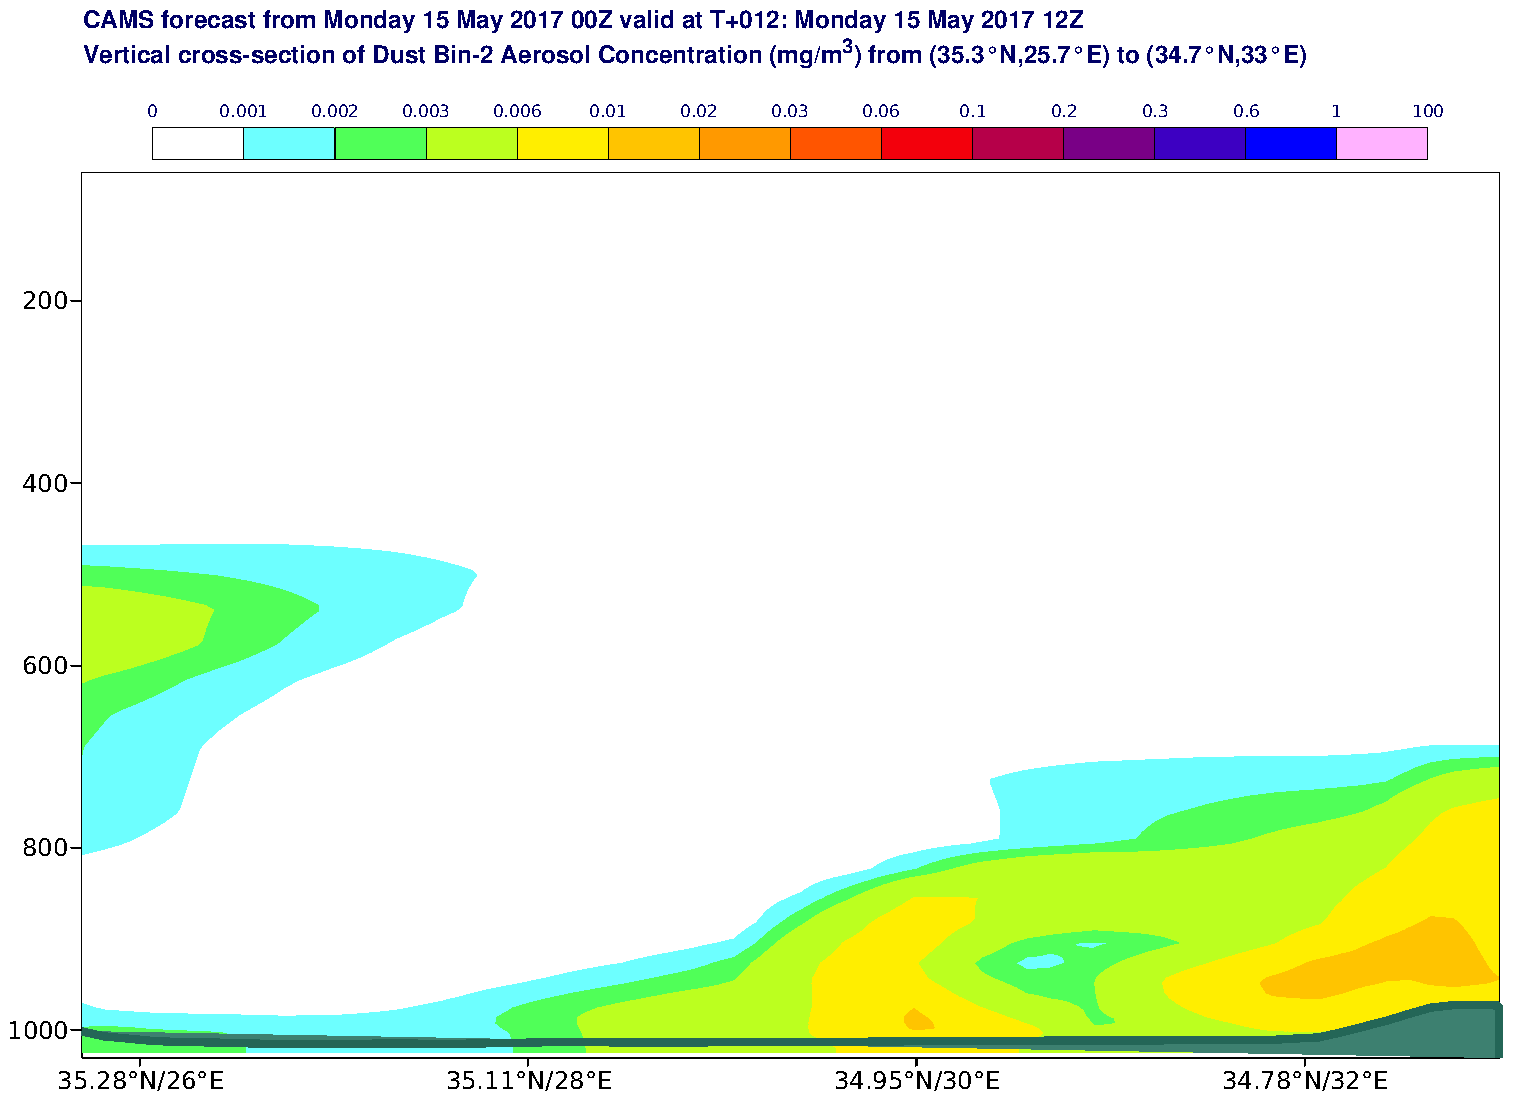 Vertical cross-section of Dust Bin-2 Aerosol Concentration (mg/m3) valid at T12 - 2017-05-15 12:00